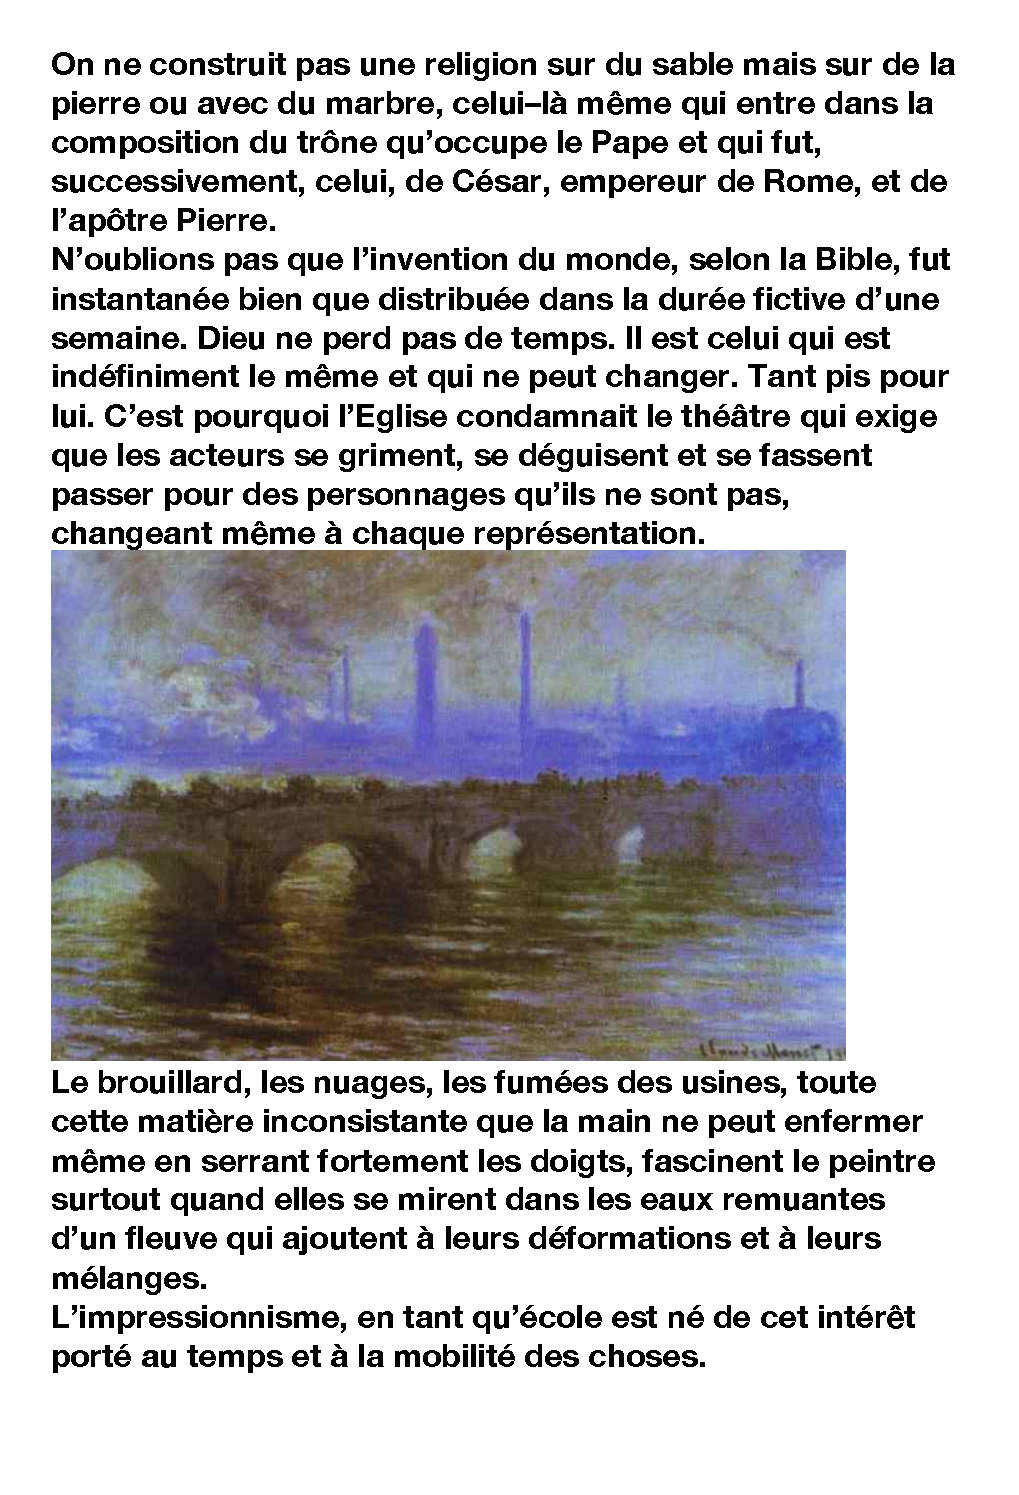 chaque-jour-2_page_05.1175326688.png